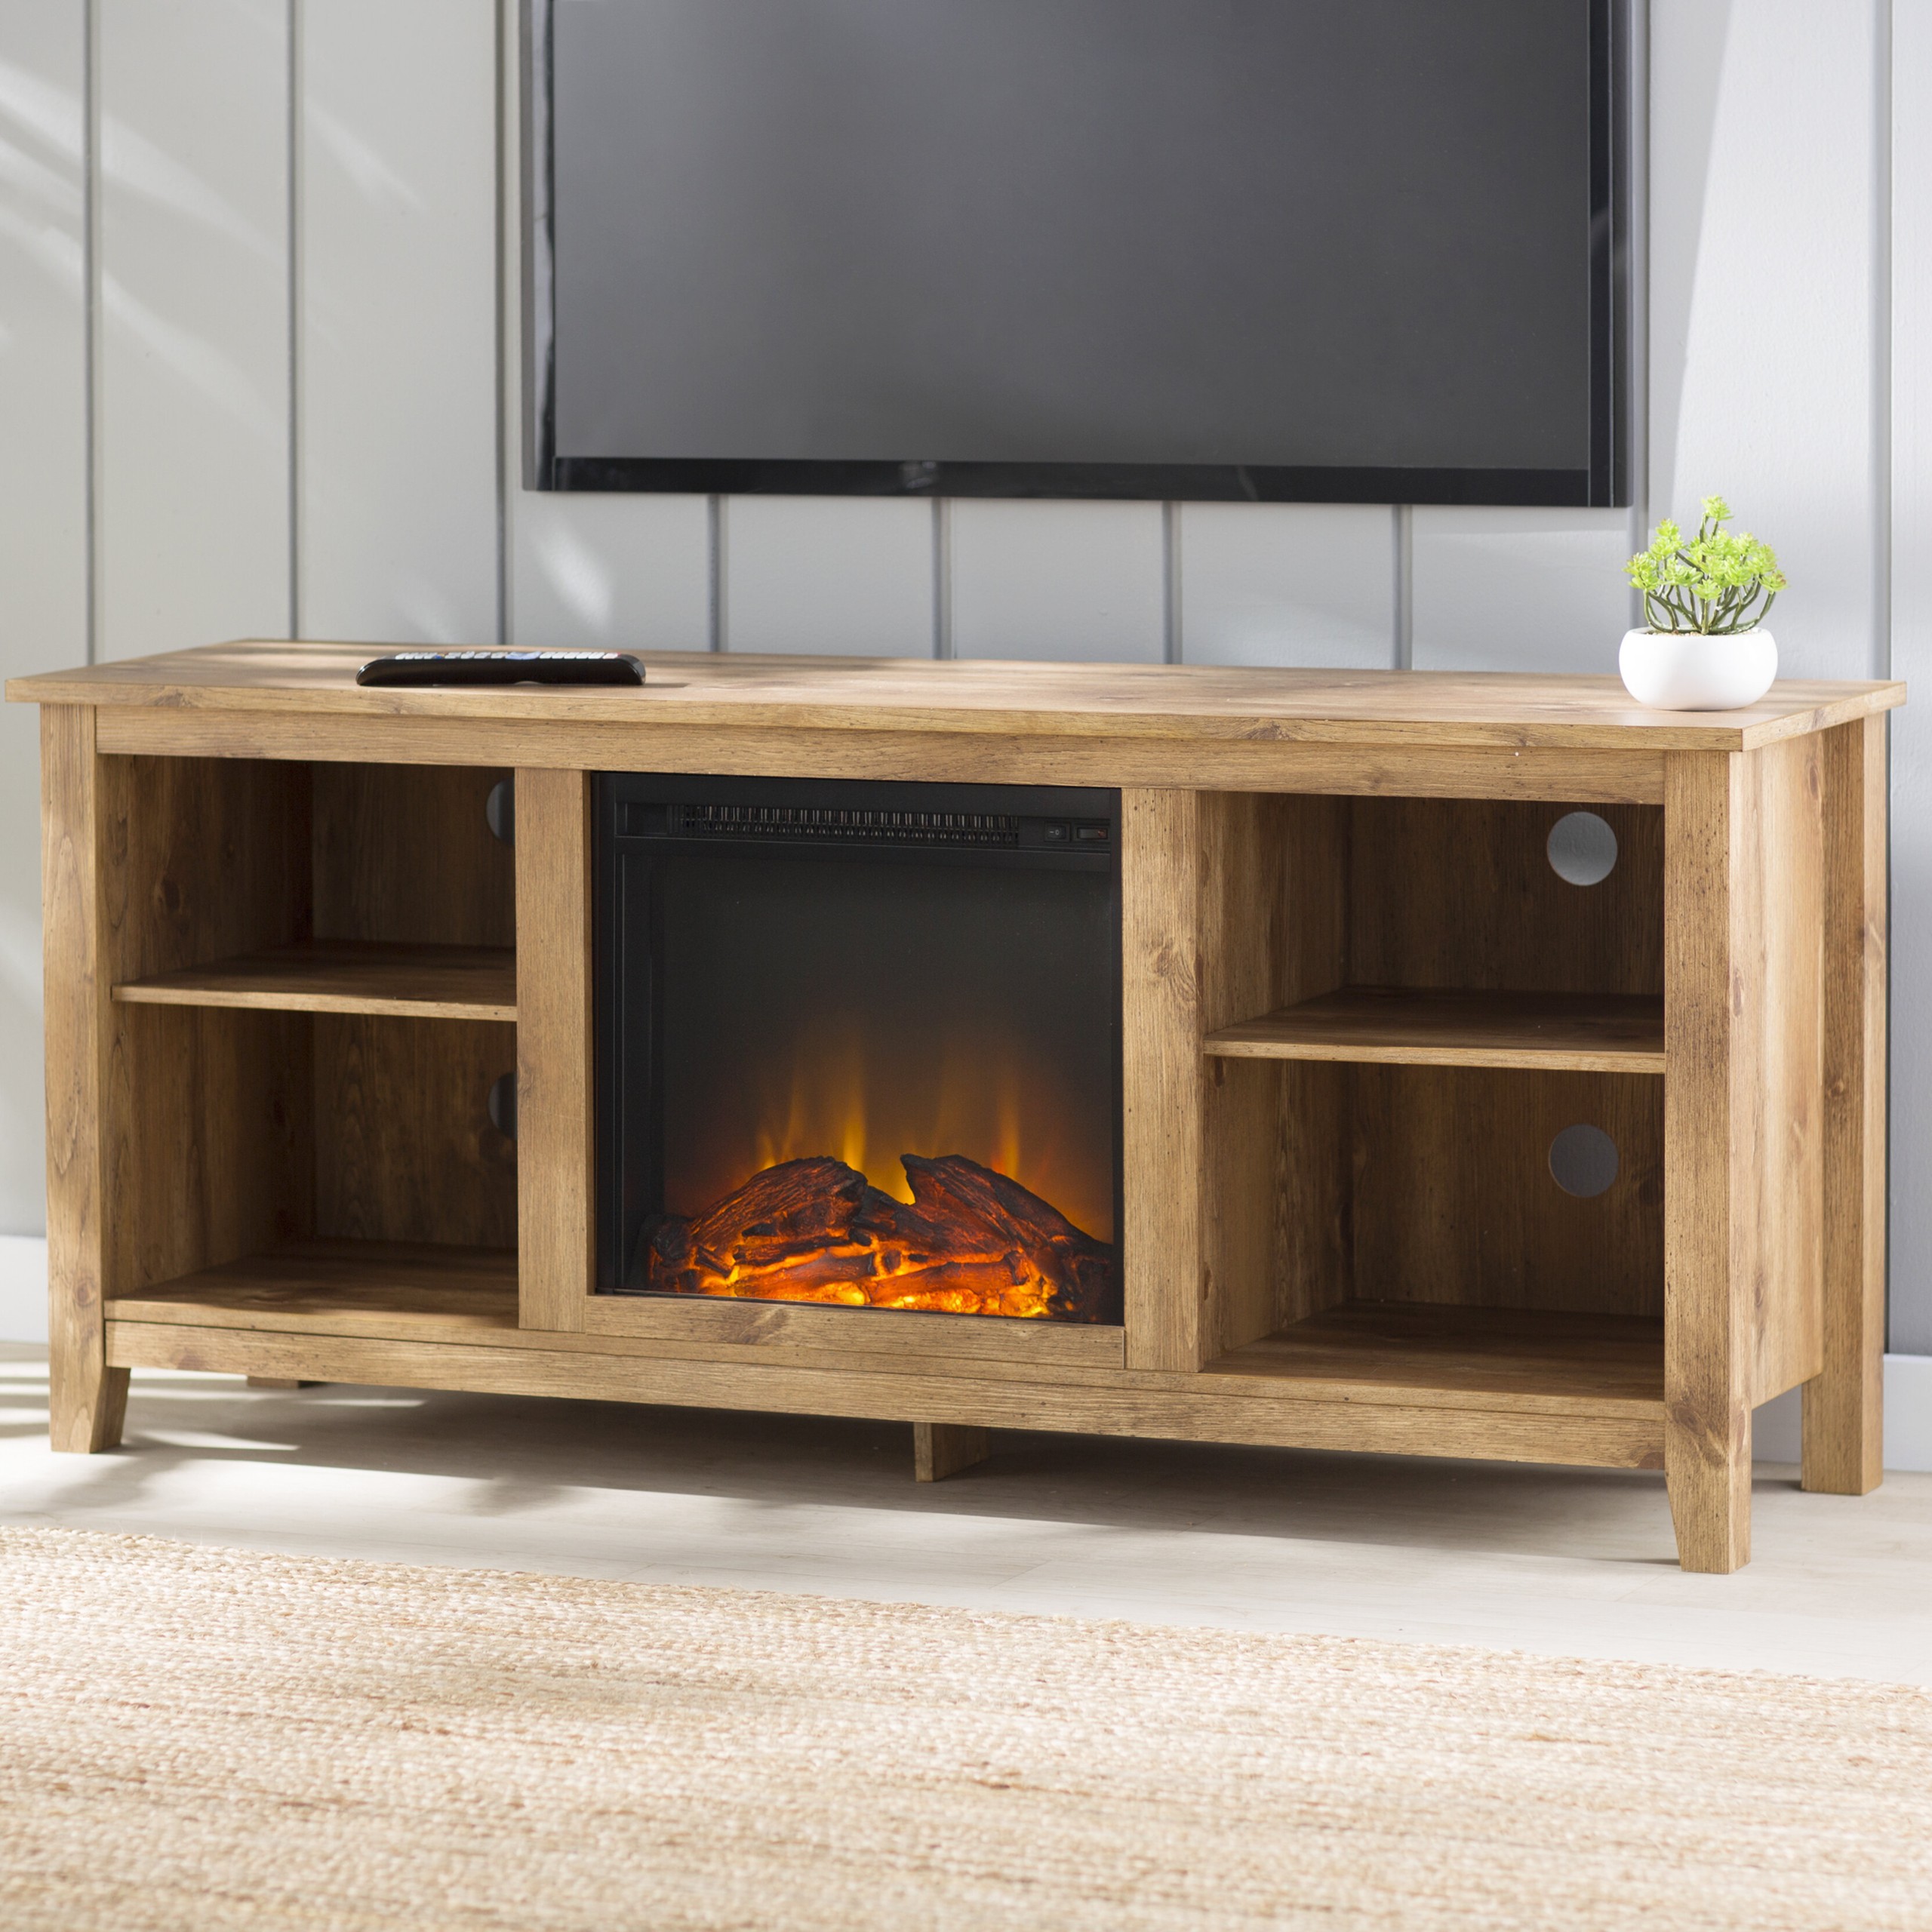 Sunbury TV Stand for TVs up to 60" with Electric Fireplace Included